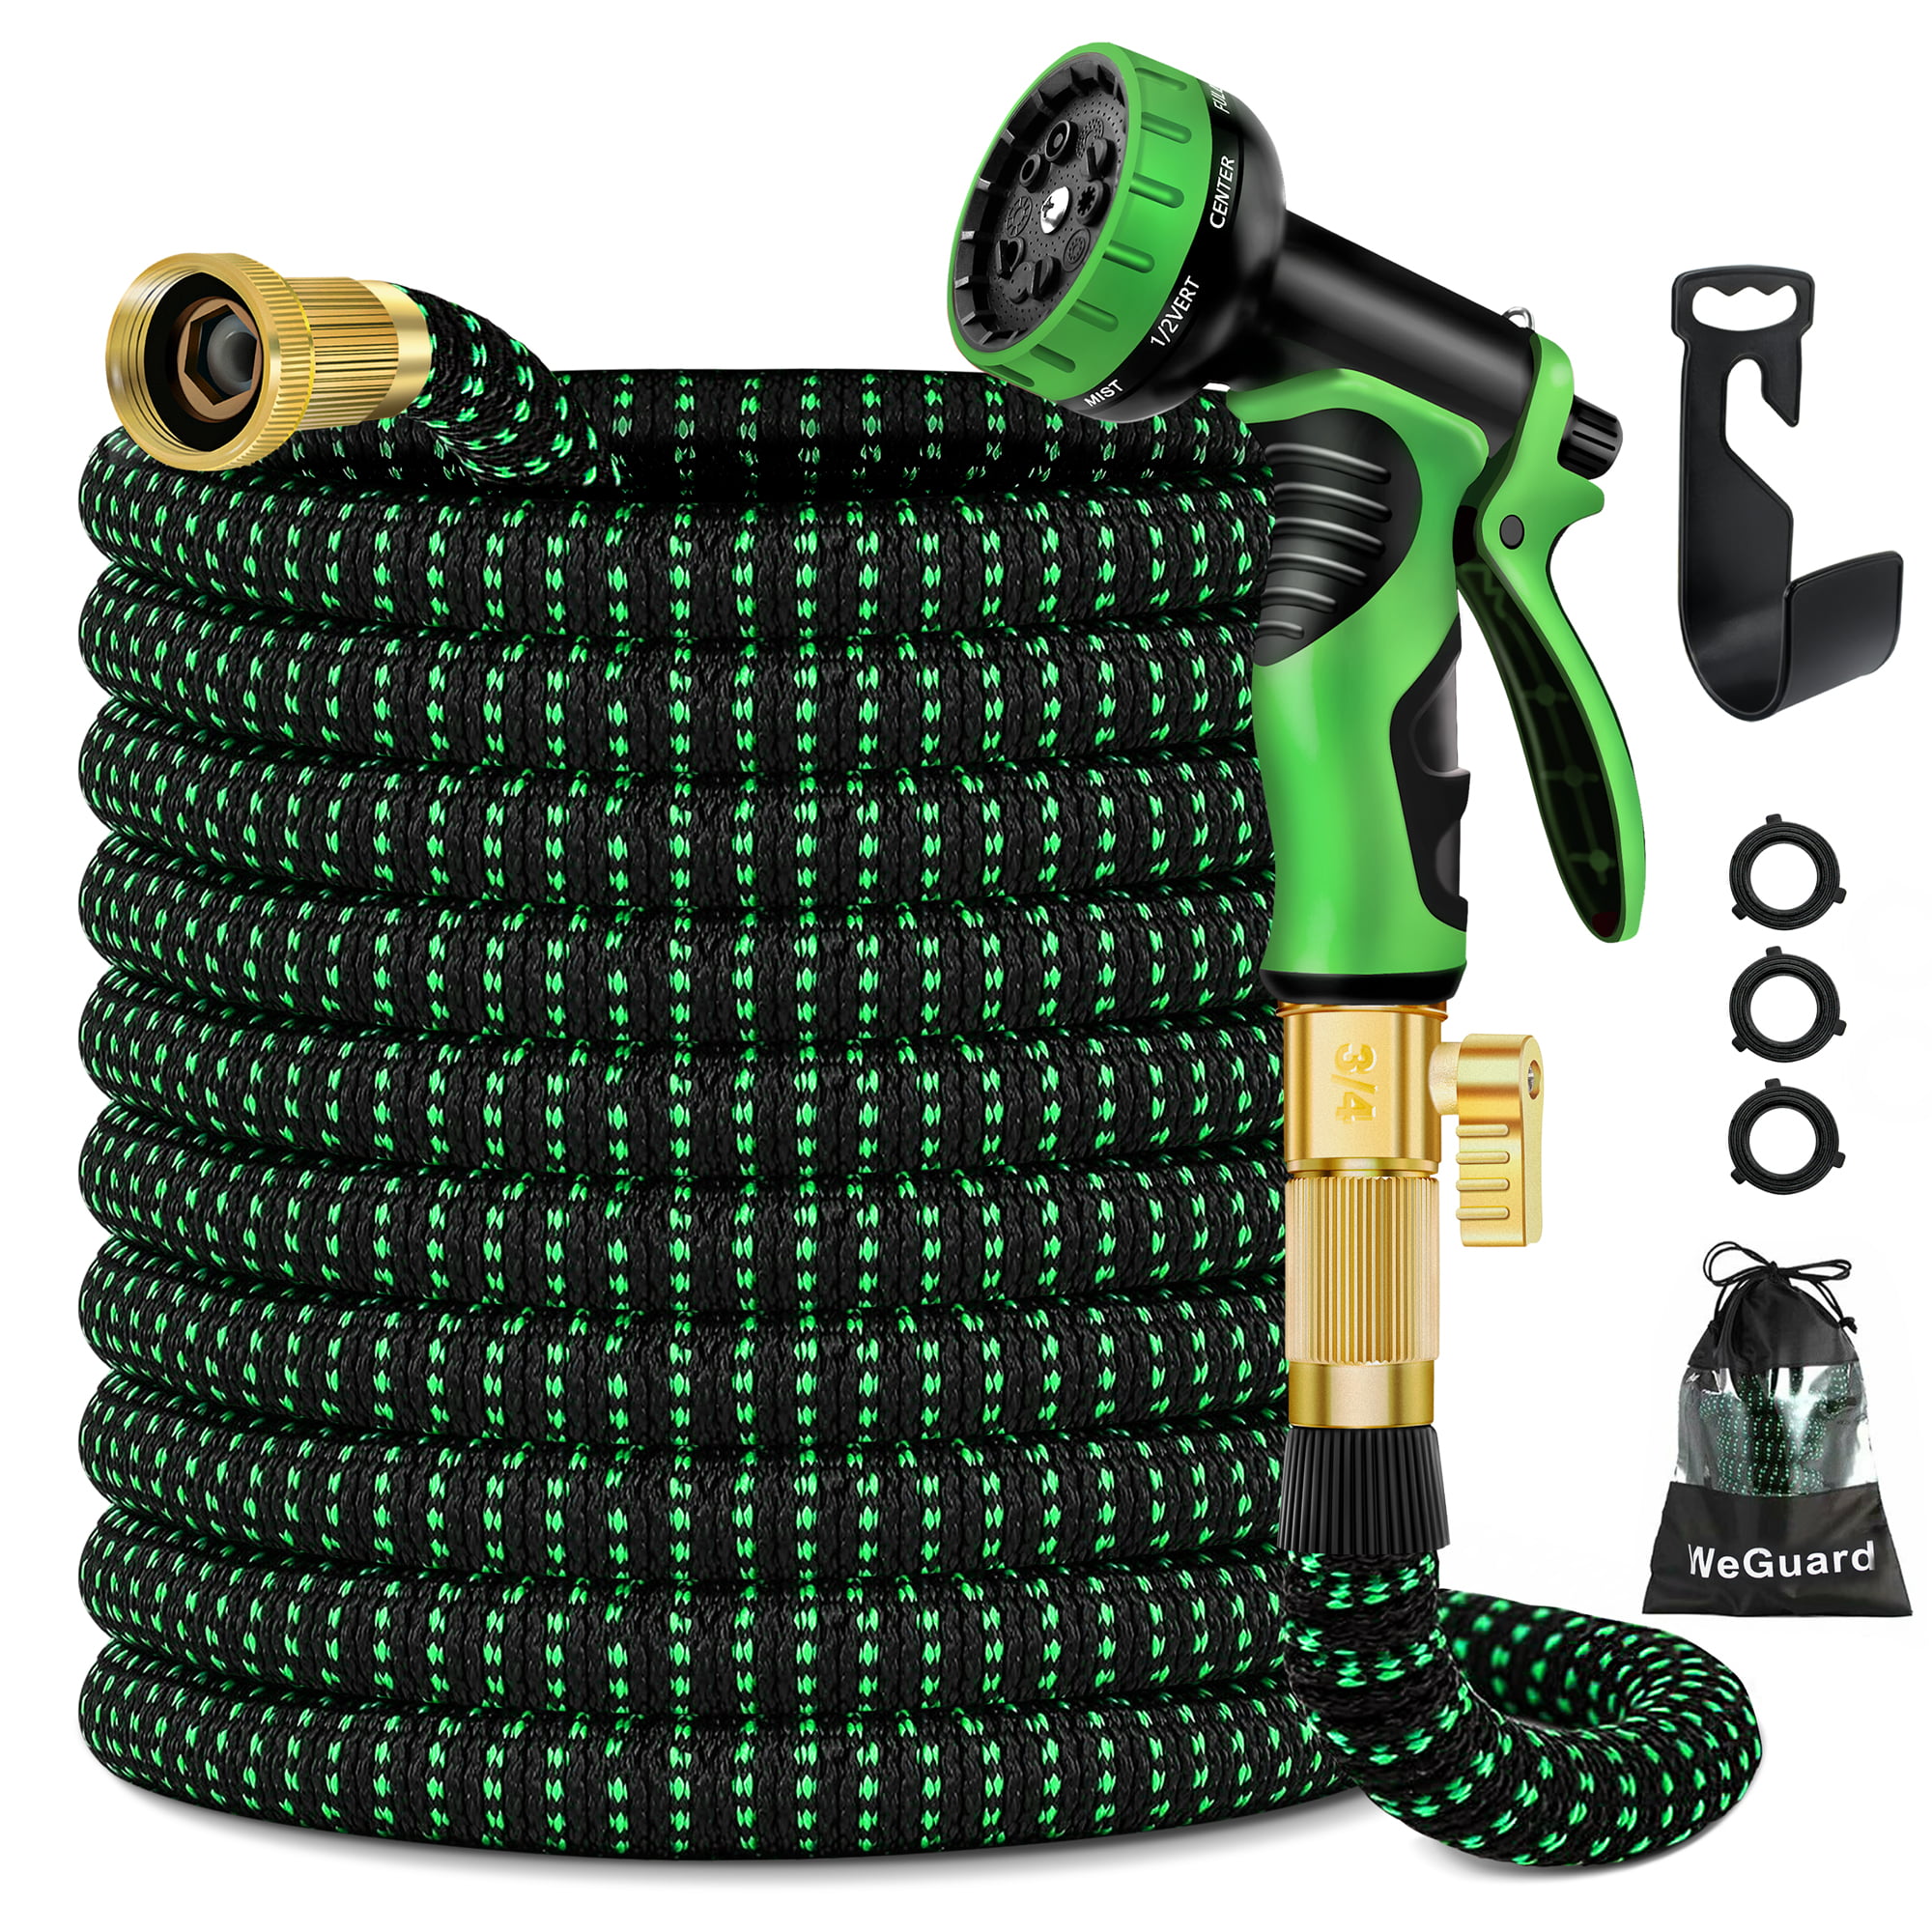 NEW FLEXIBLE HOSE HOLDER EXPANDABLE OUDOOR GARAGE HOSES GARDEN TIDY SHED UTILITY 